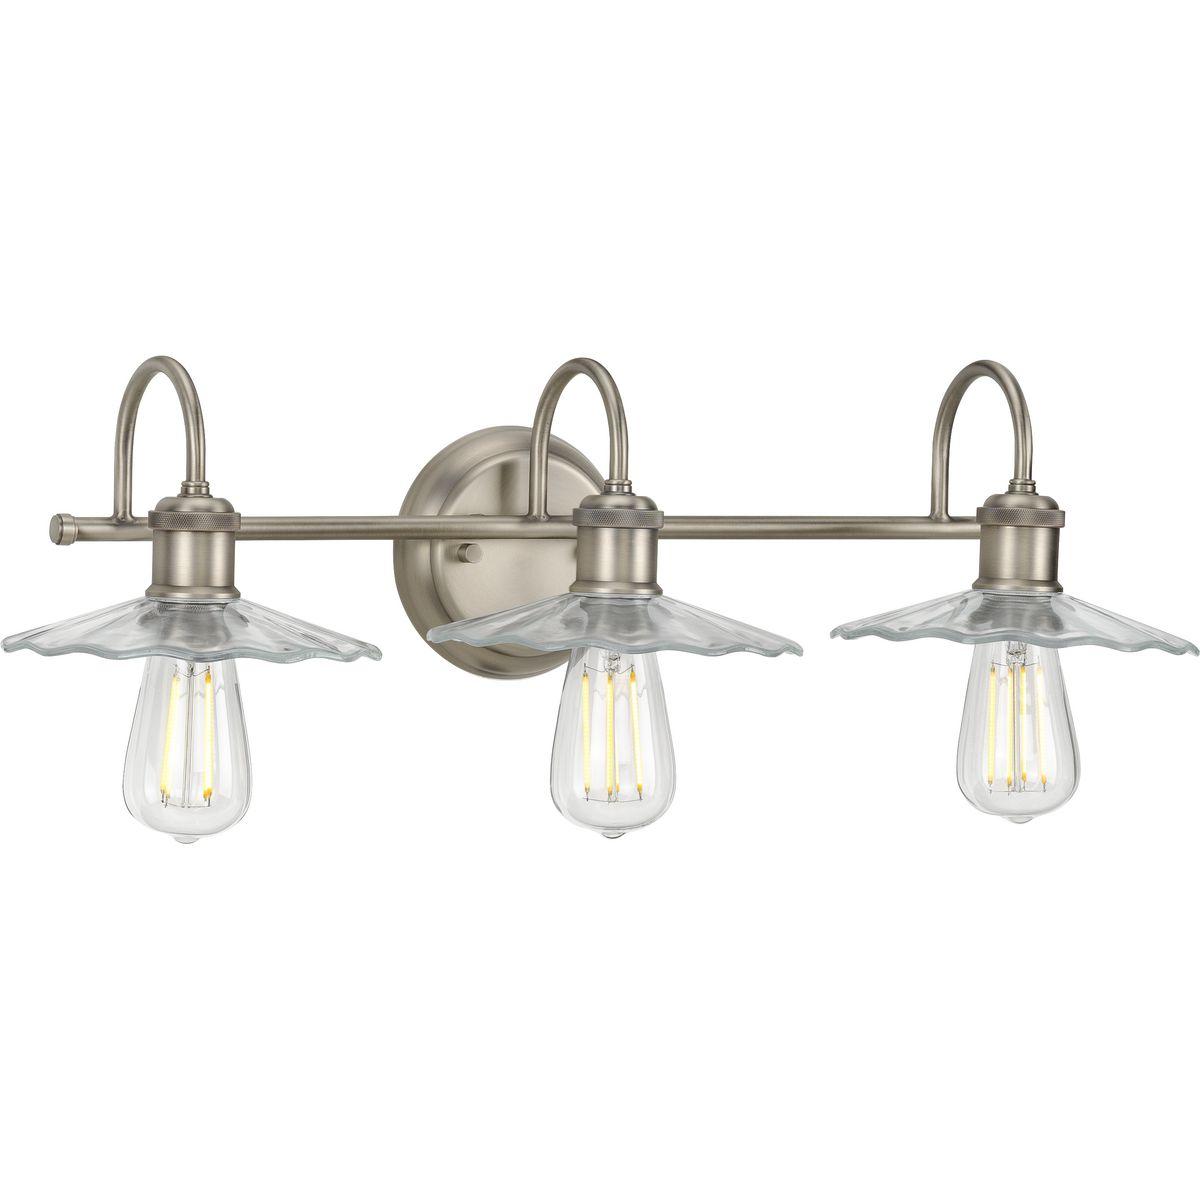 Hubbell P300288-081 Inspired from early electric lighting, this bath light will infuse your home with a sense of history. A simple antique nickel bar attached to a backplate supports curved arms bending to hold vintage-style light bases. Petal-like light shades crafted from 